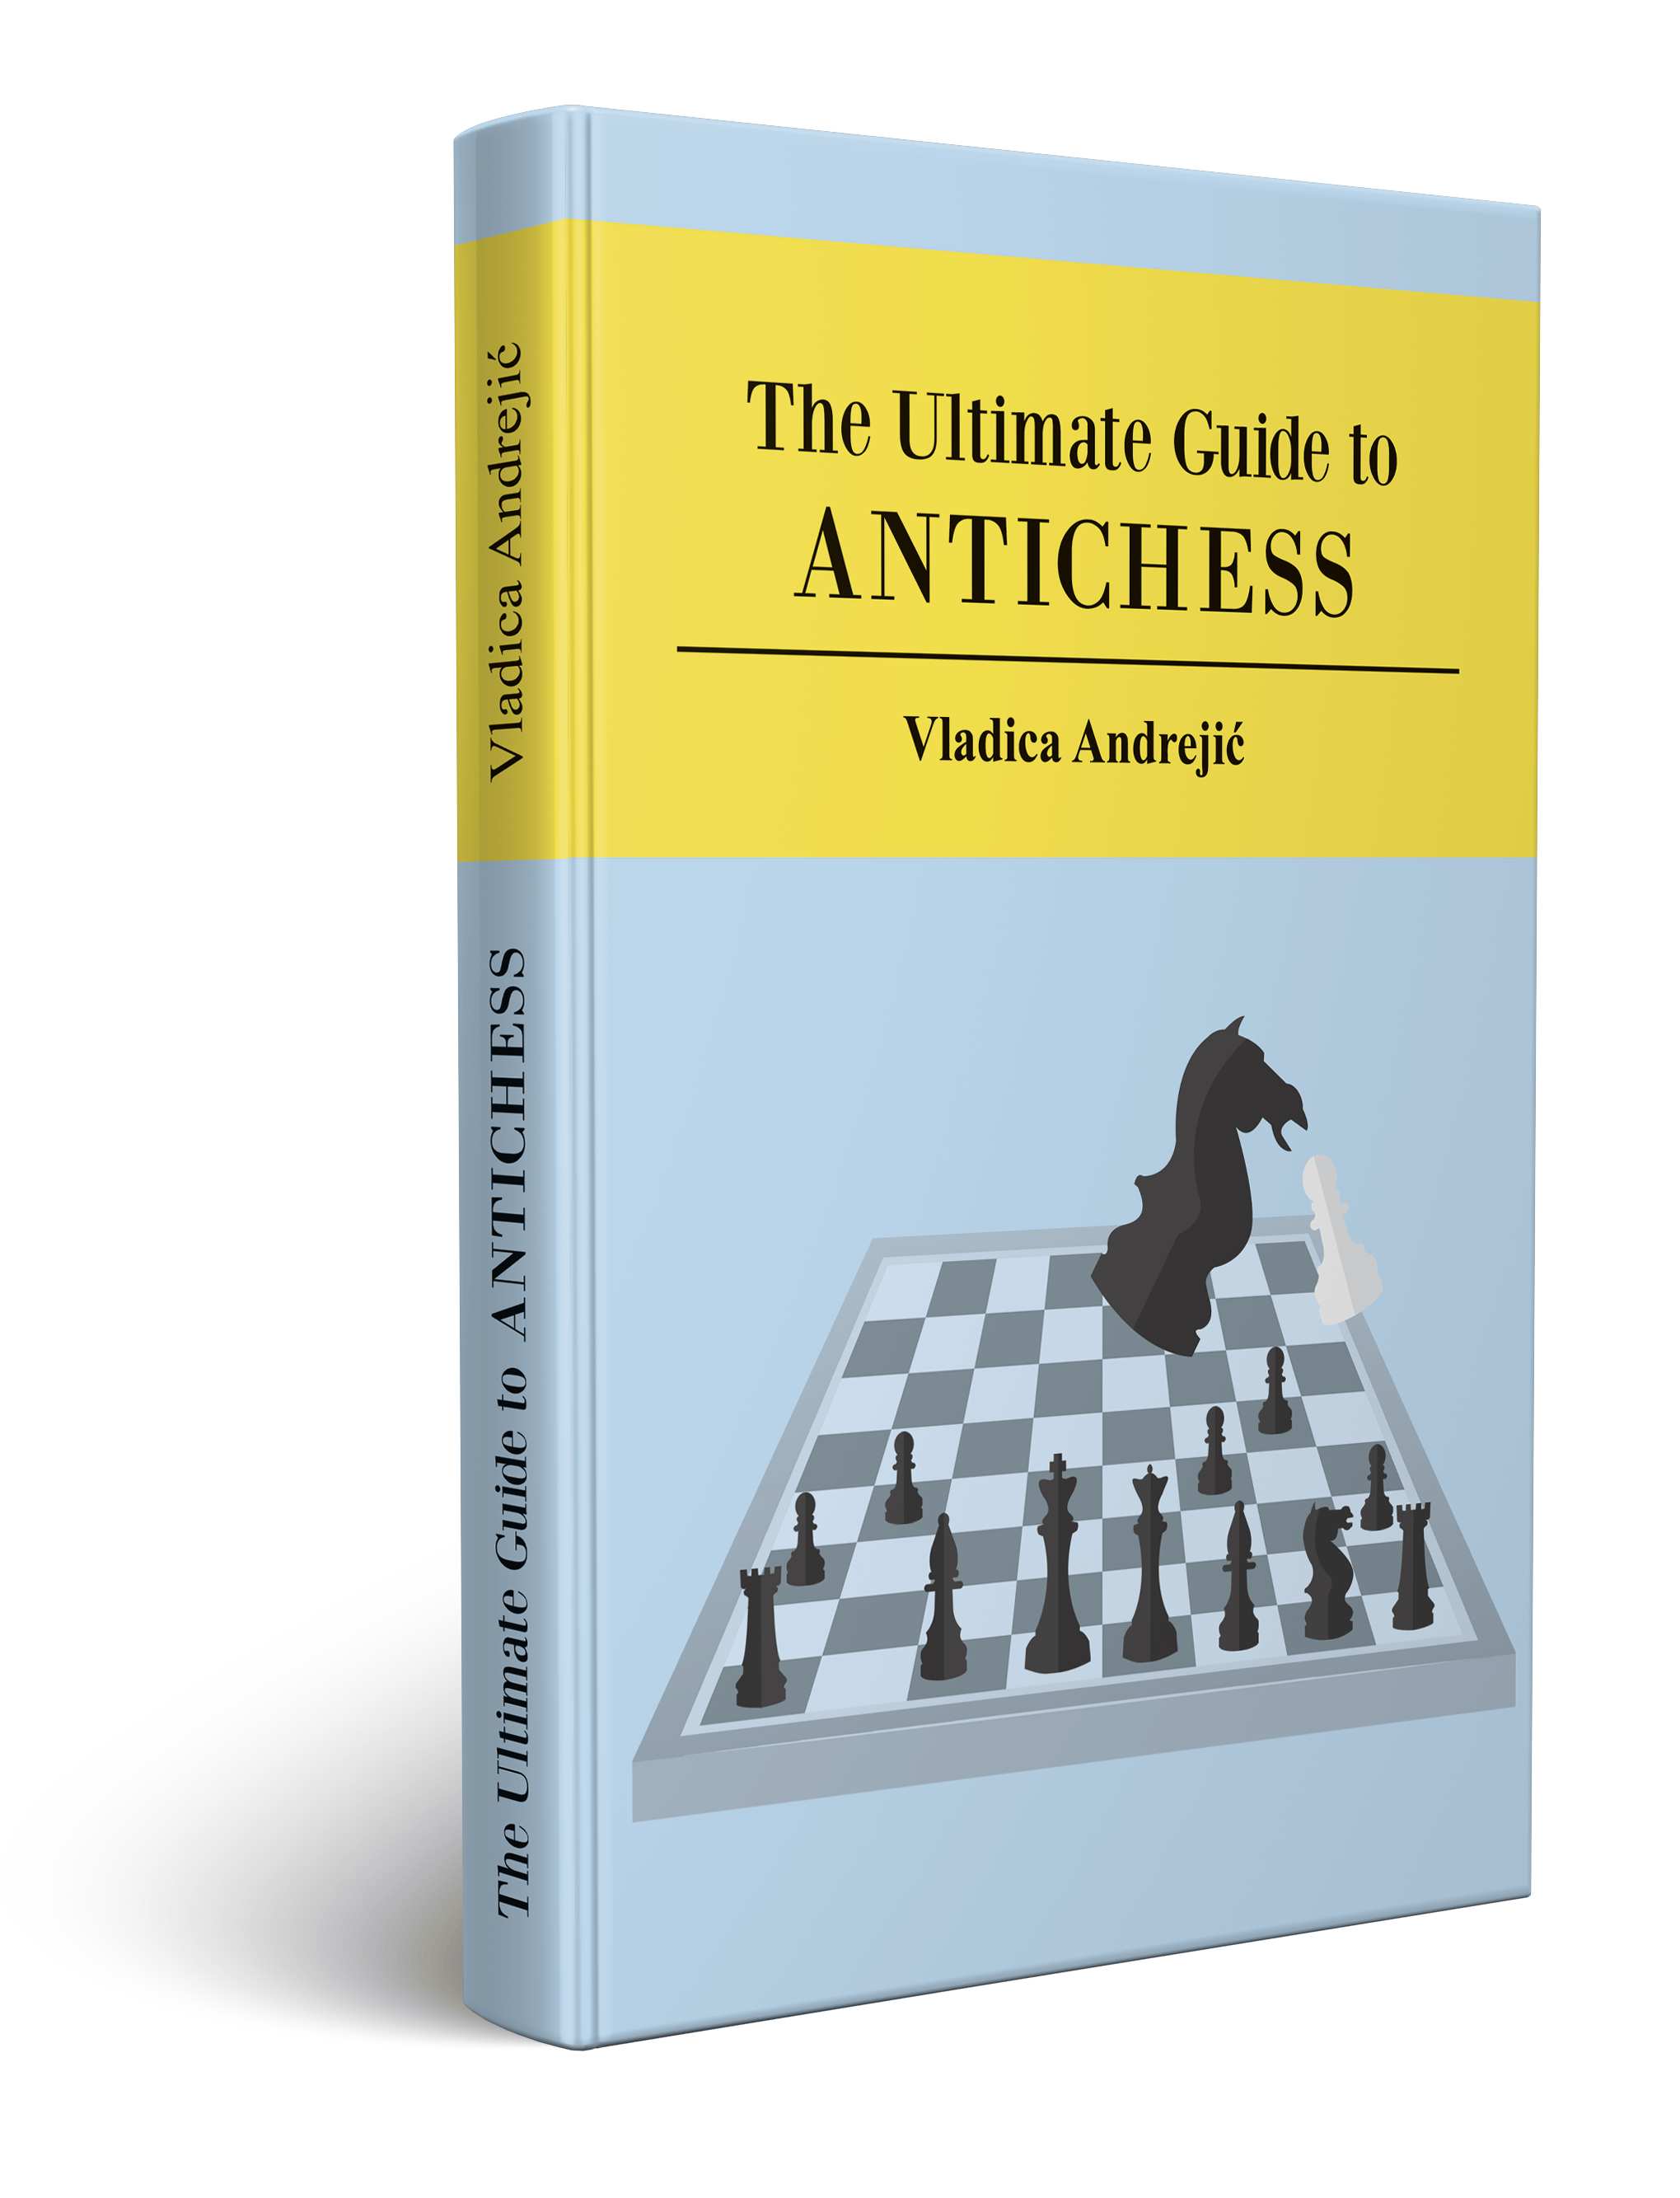 Andrejic: The Ultimate Guide to Antichess